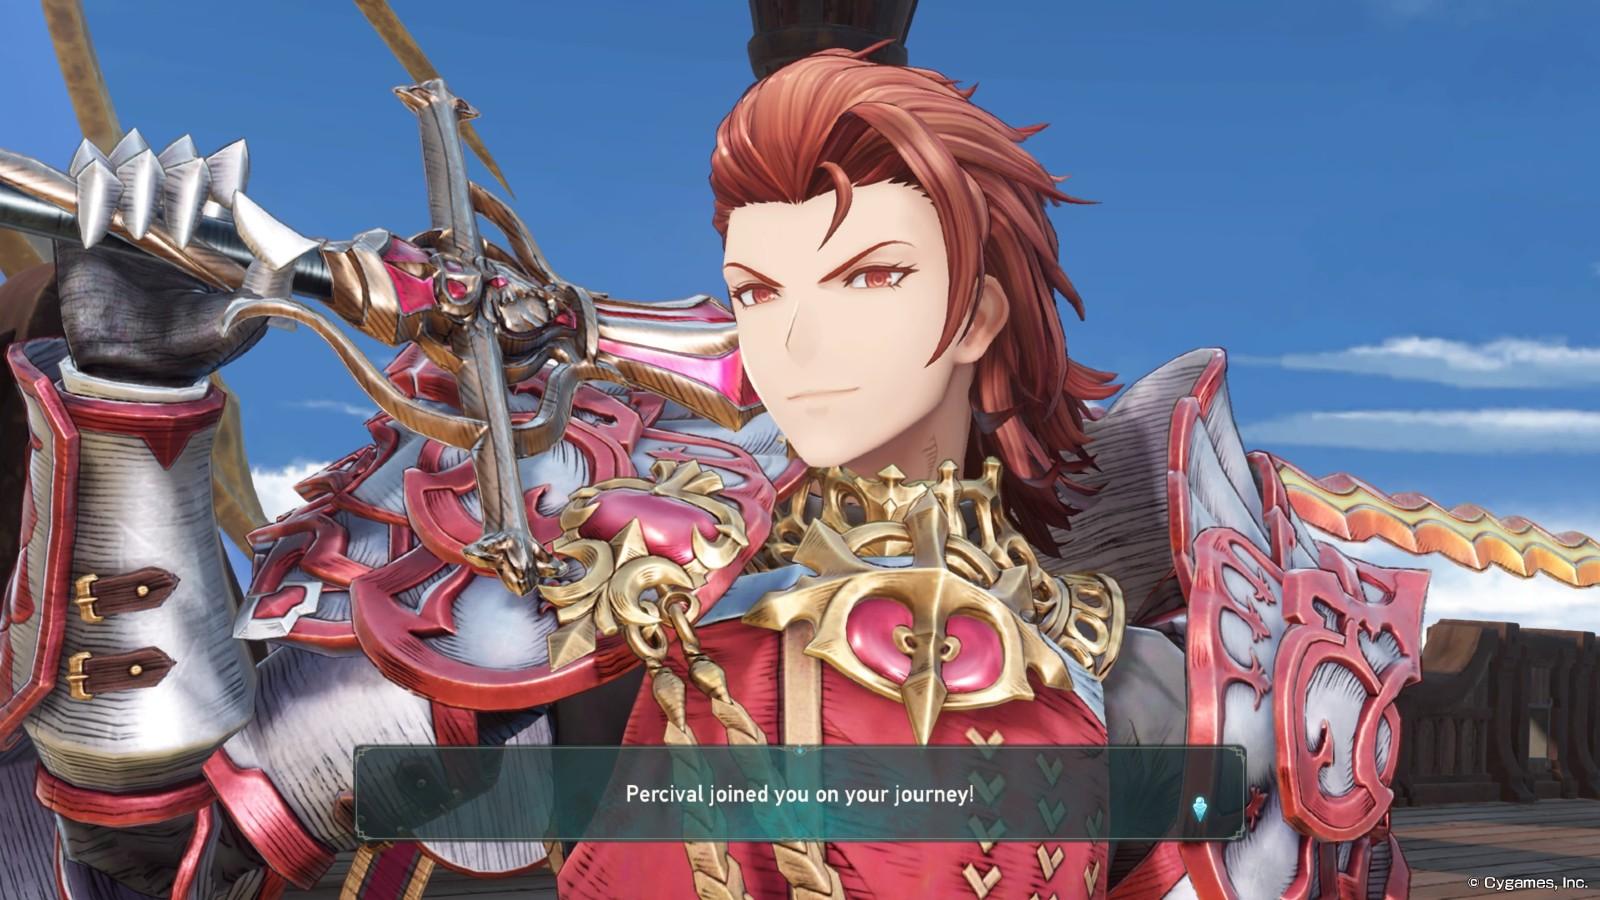 An image of Percival after he's been unlocked in Granblue Fantasy: Relink.